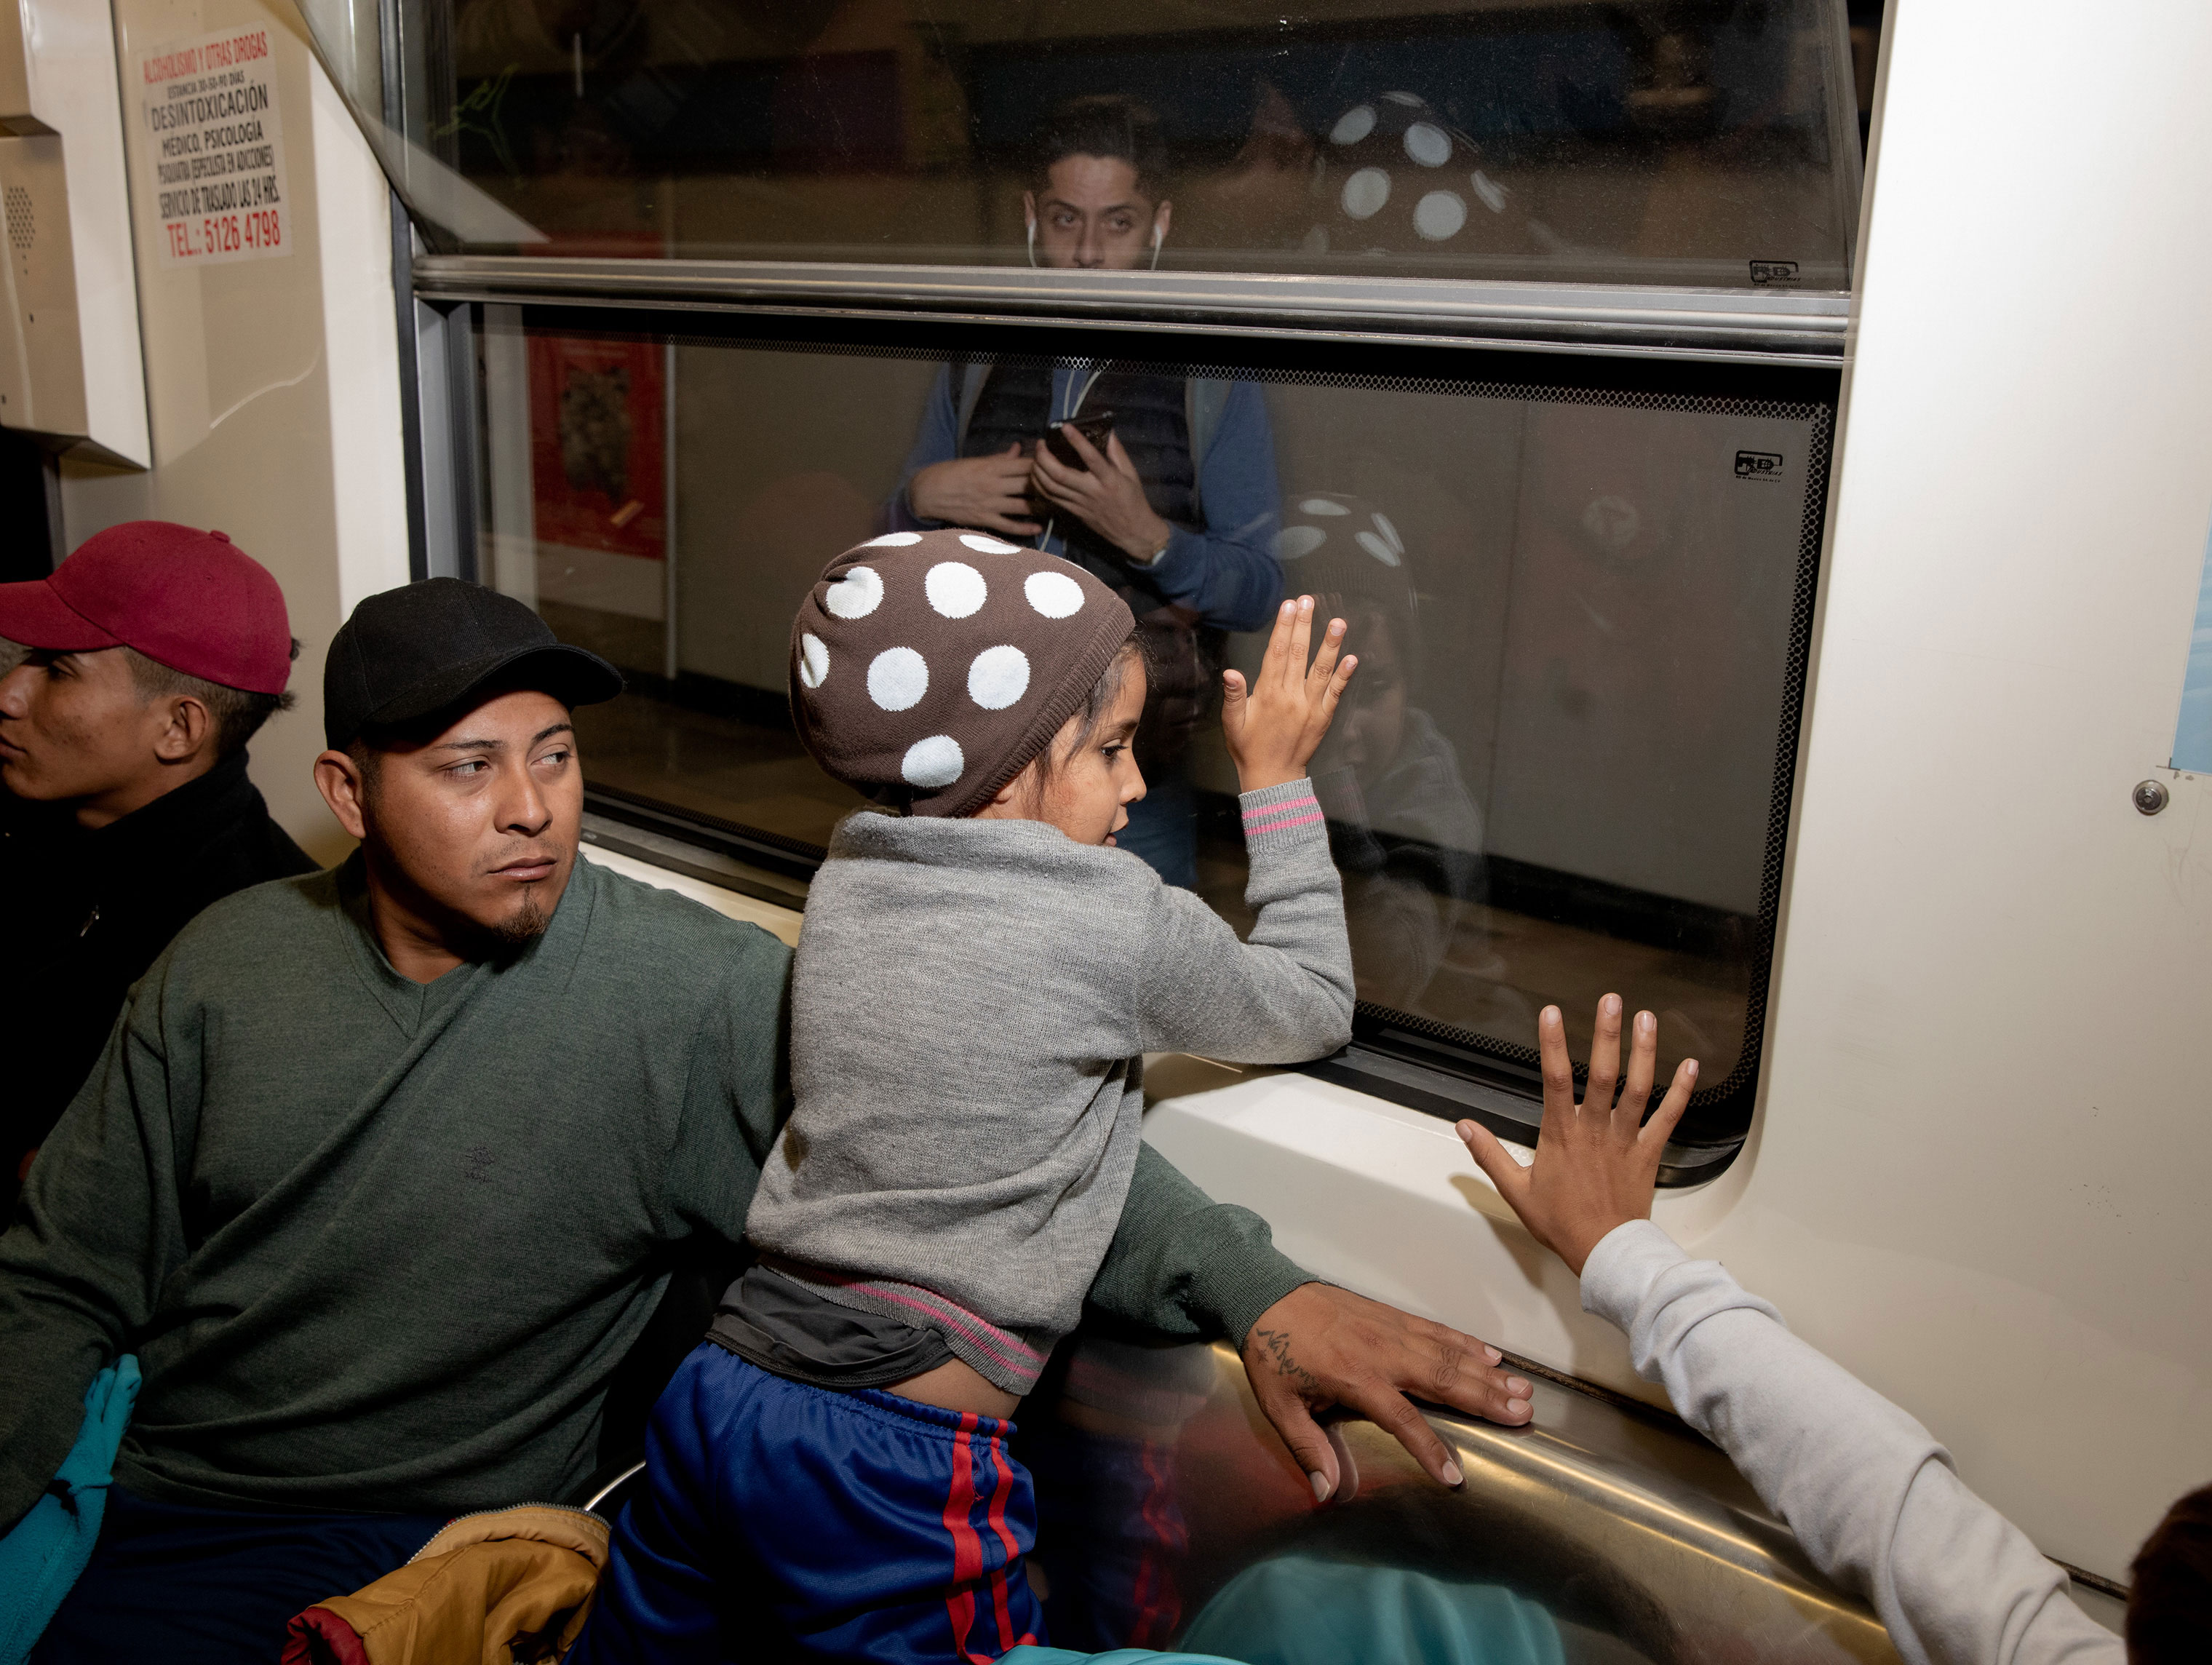 The migrant caravan exited Mexico City on the metro on the morning of Nov. 10, 2018. A young girl waves to a woman on the other side of the metro car. (Jerome Sessini—Magnum Photos for TIME)